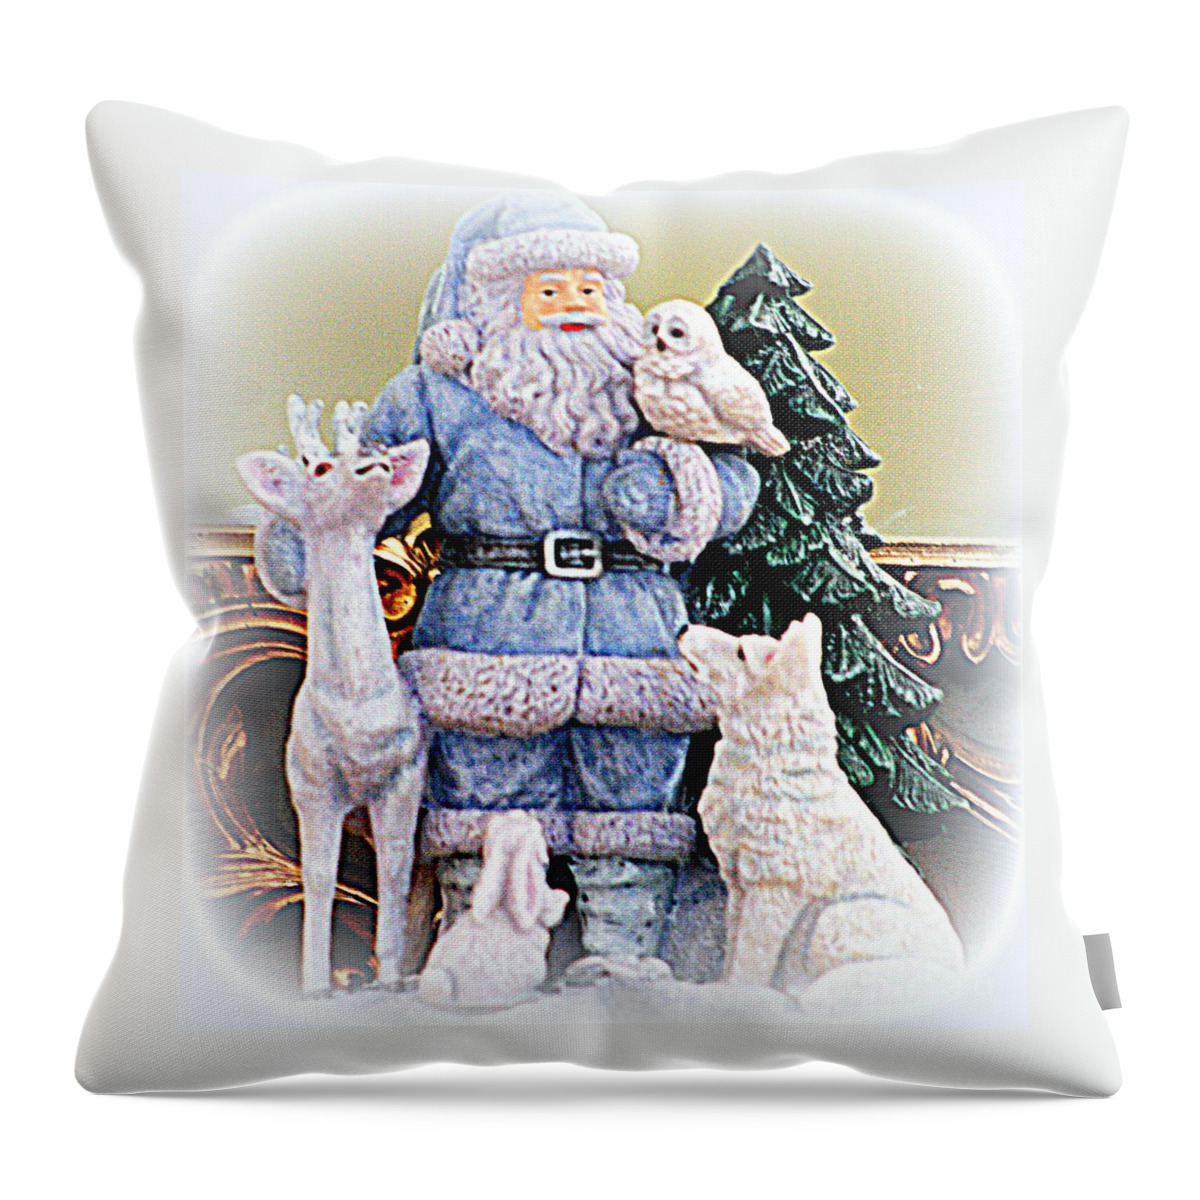 Santa Claus Throw Pillow featuring the photograph Blue Santa With Animal Friends by Kay Novy